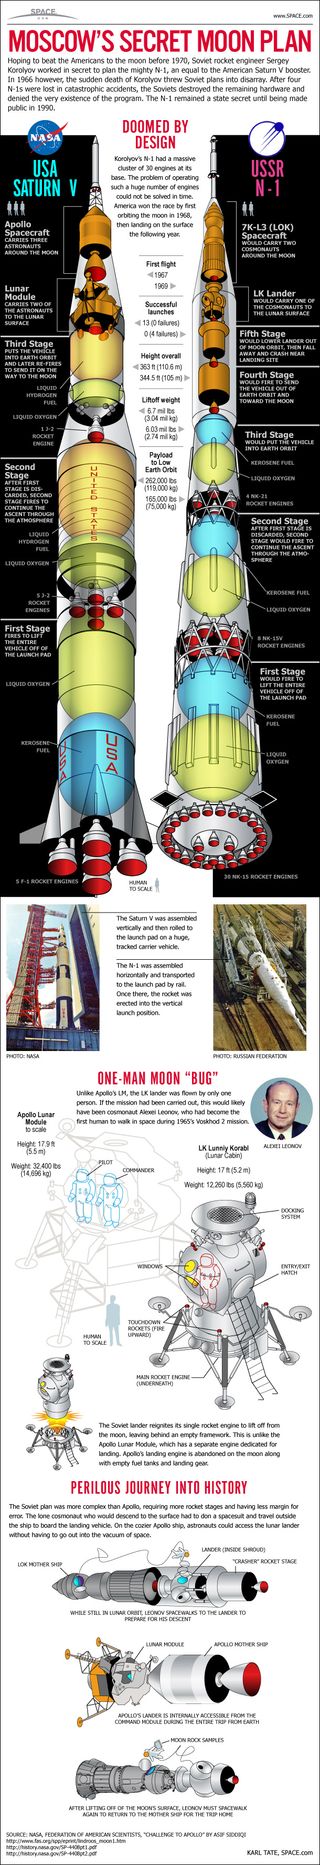 See how the former Soviet Union planned to send astronauts to the moon using its N-1 rocket.